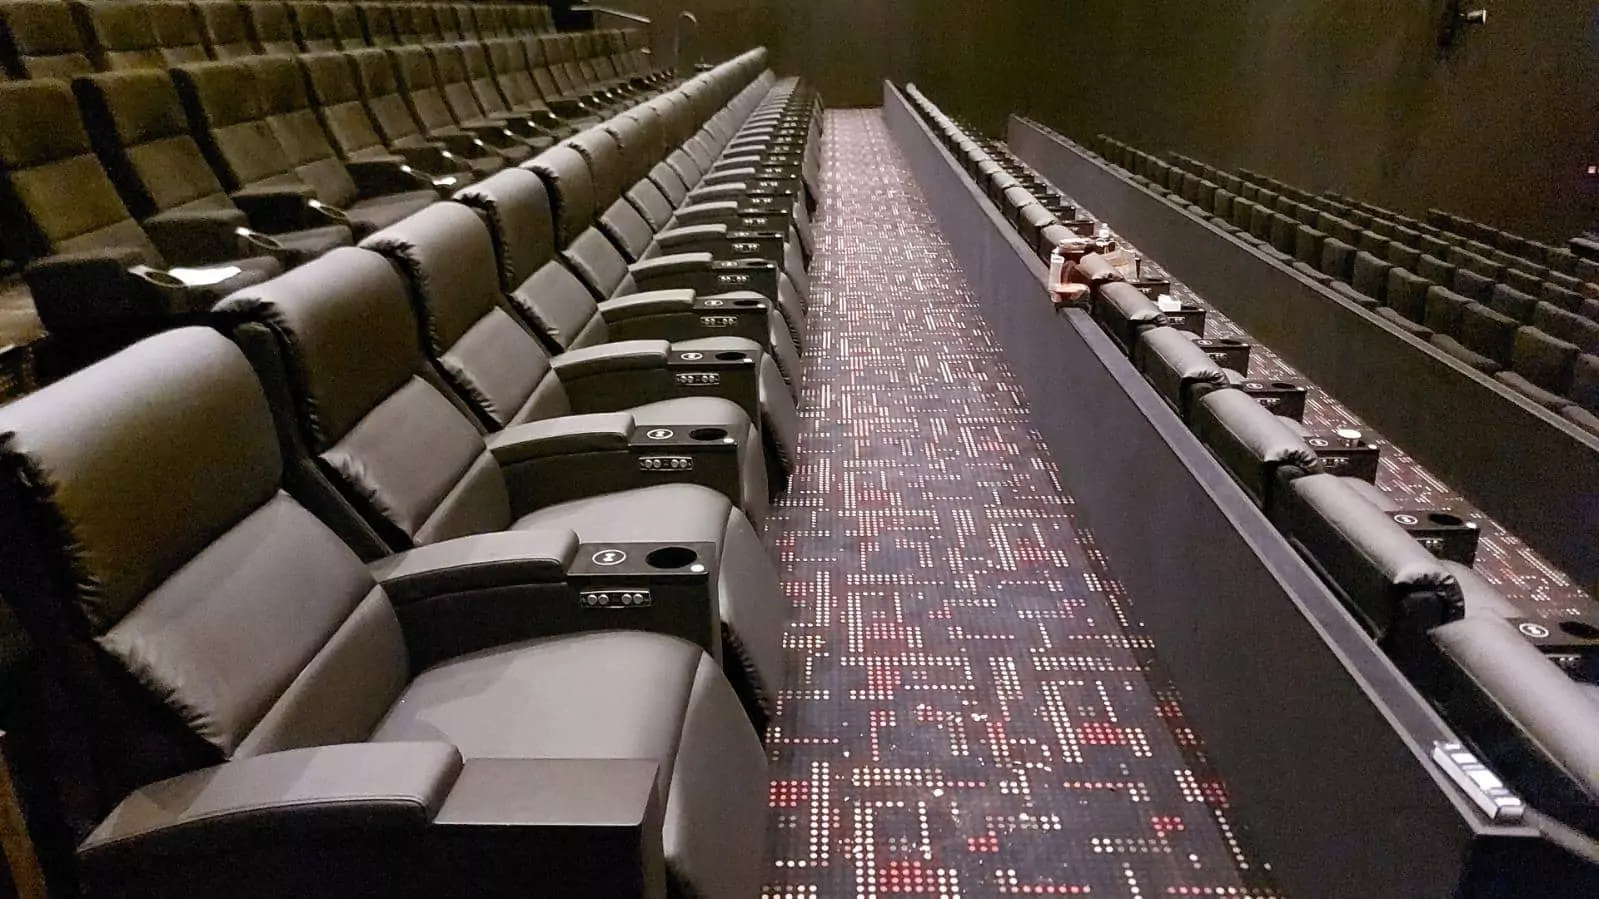 Cinema Seating Project - Monseat